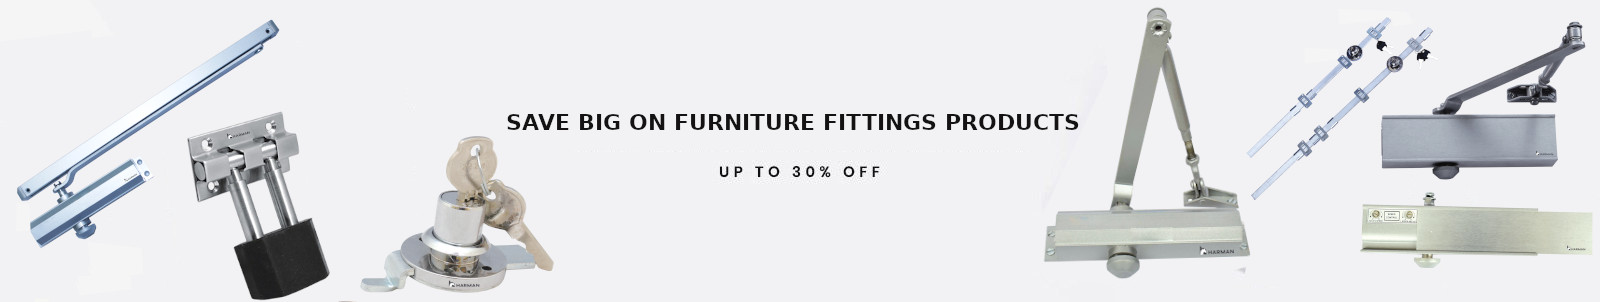 Save Big On Furniture Fittings Products